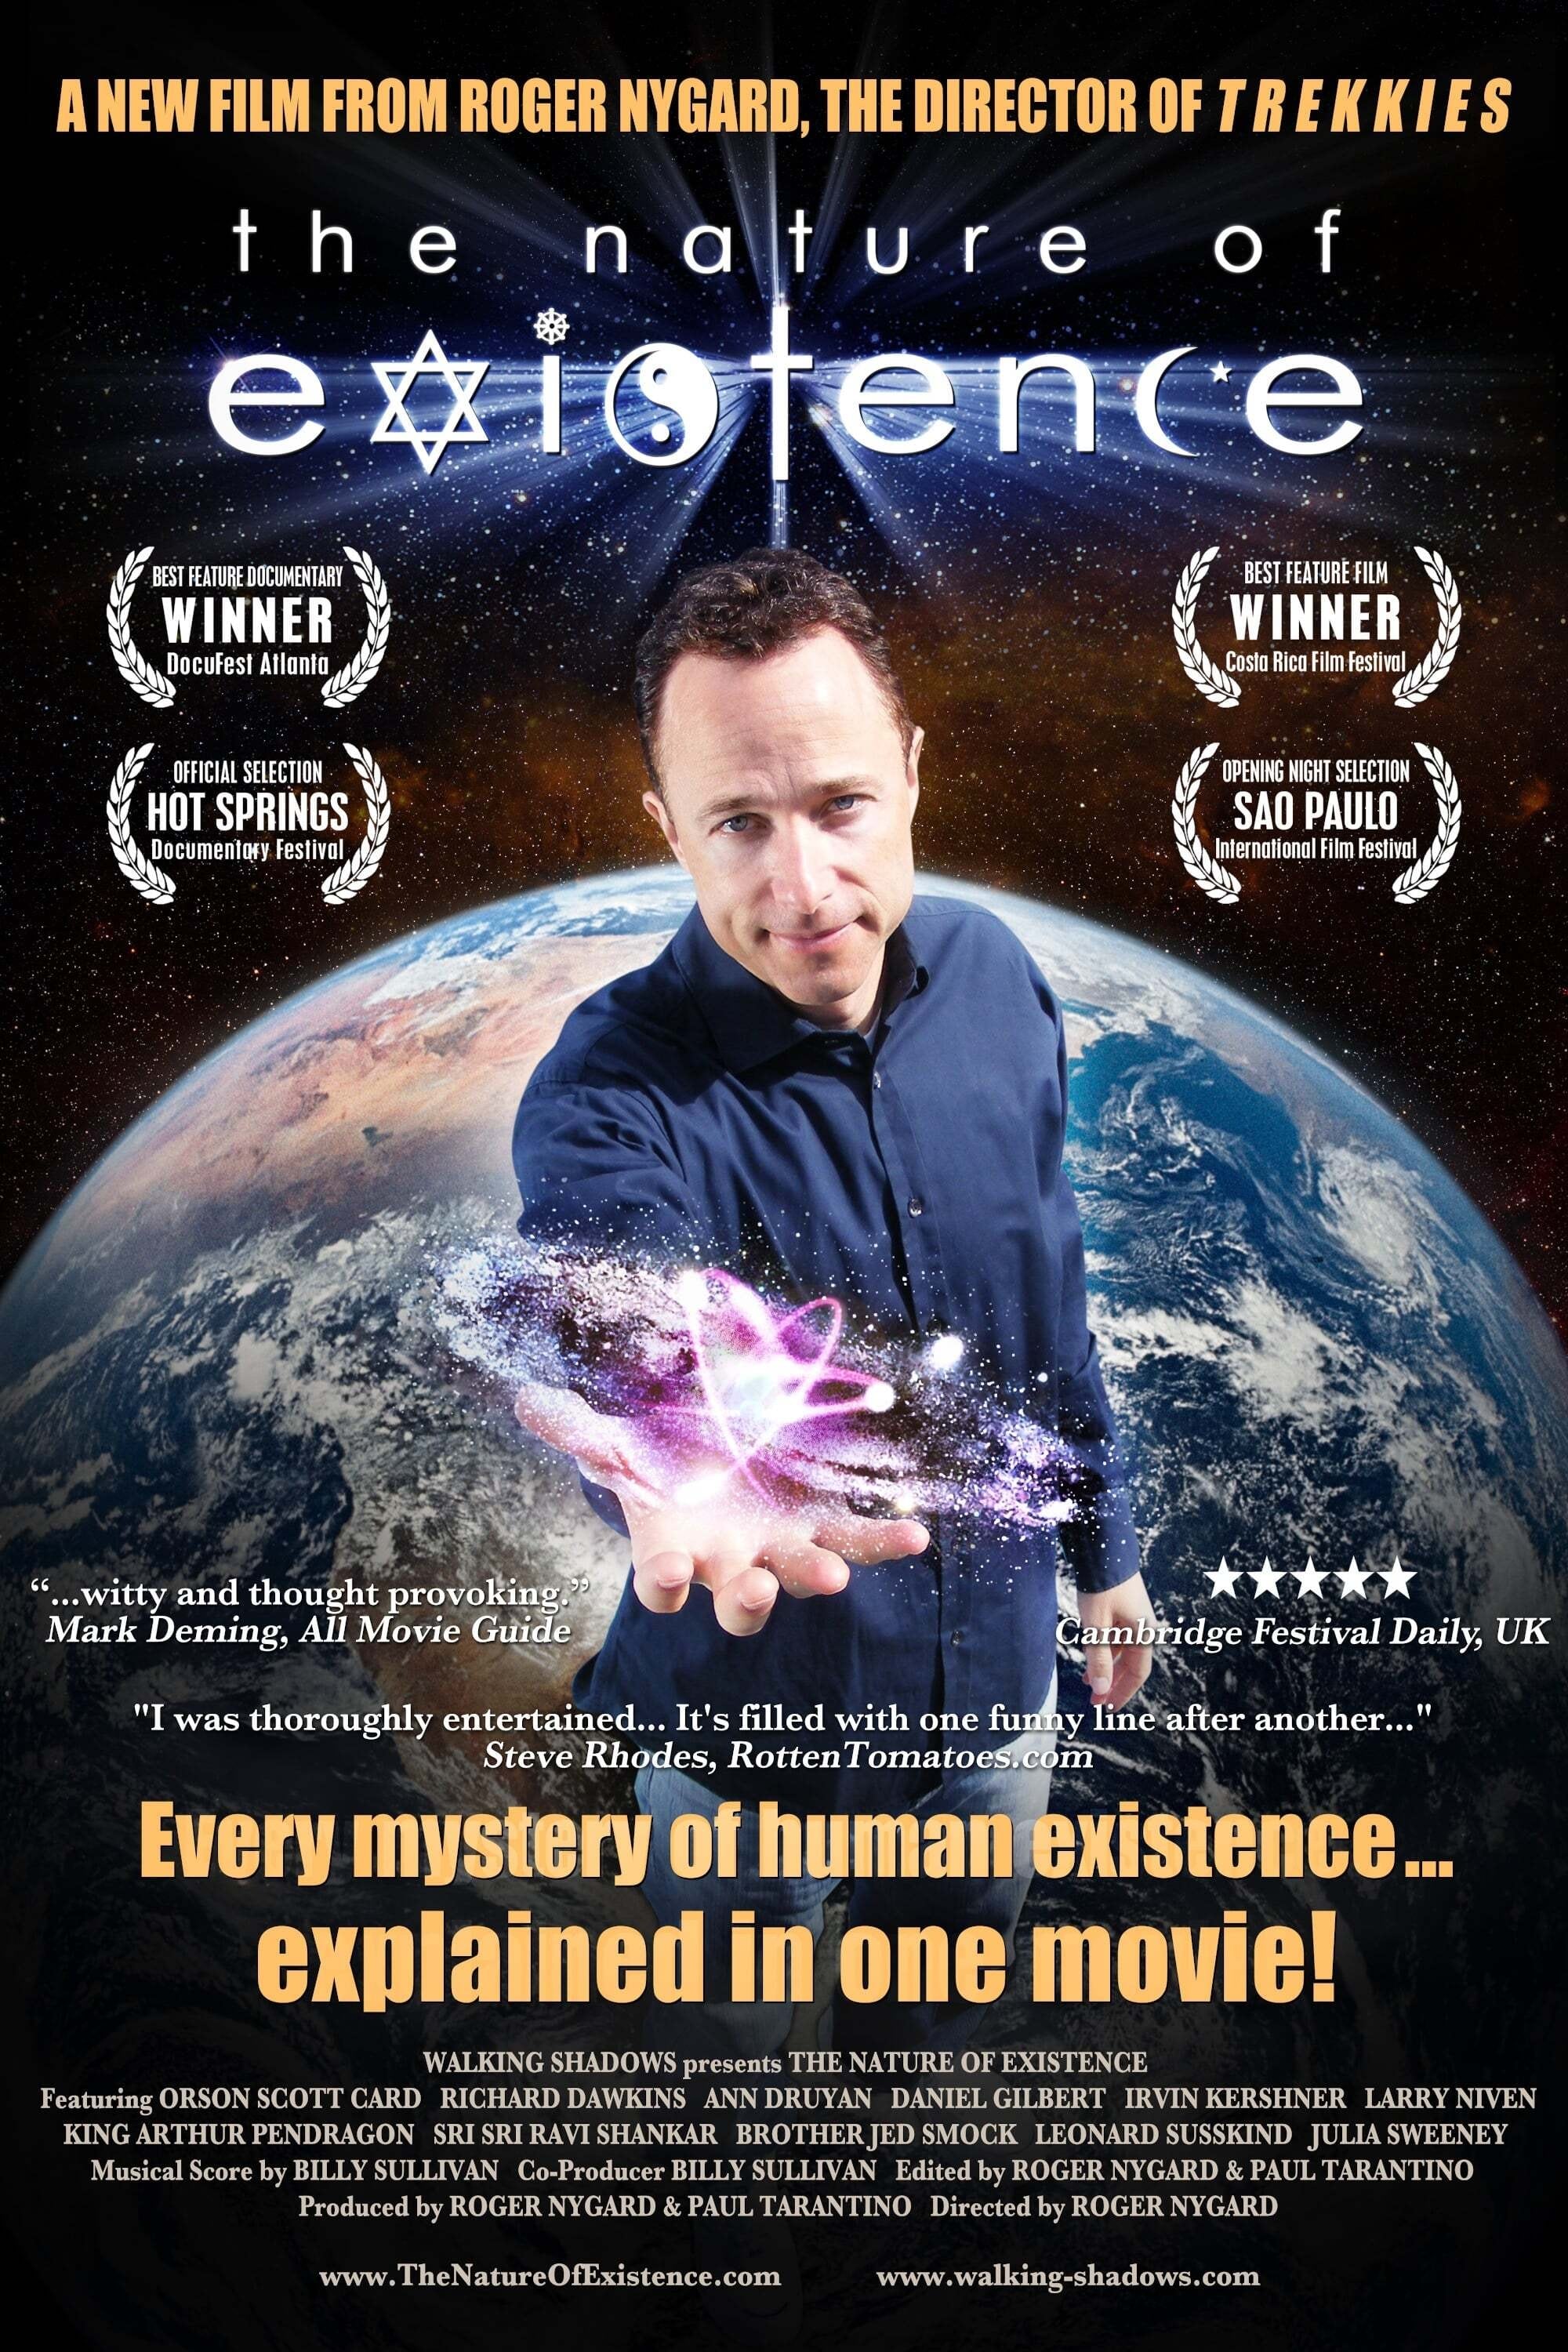 The Nature of Existence Companion Series (2011)